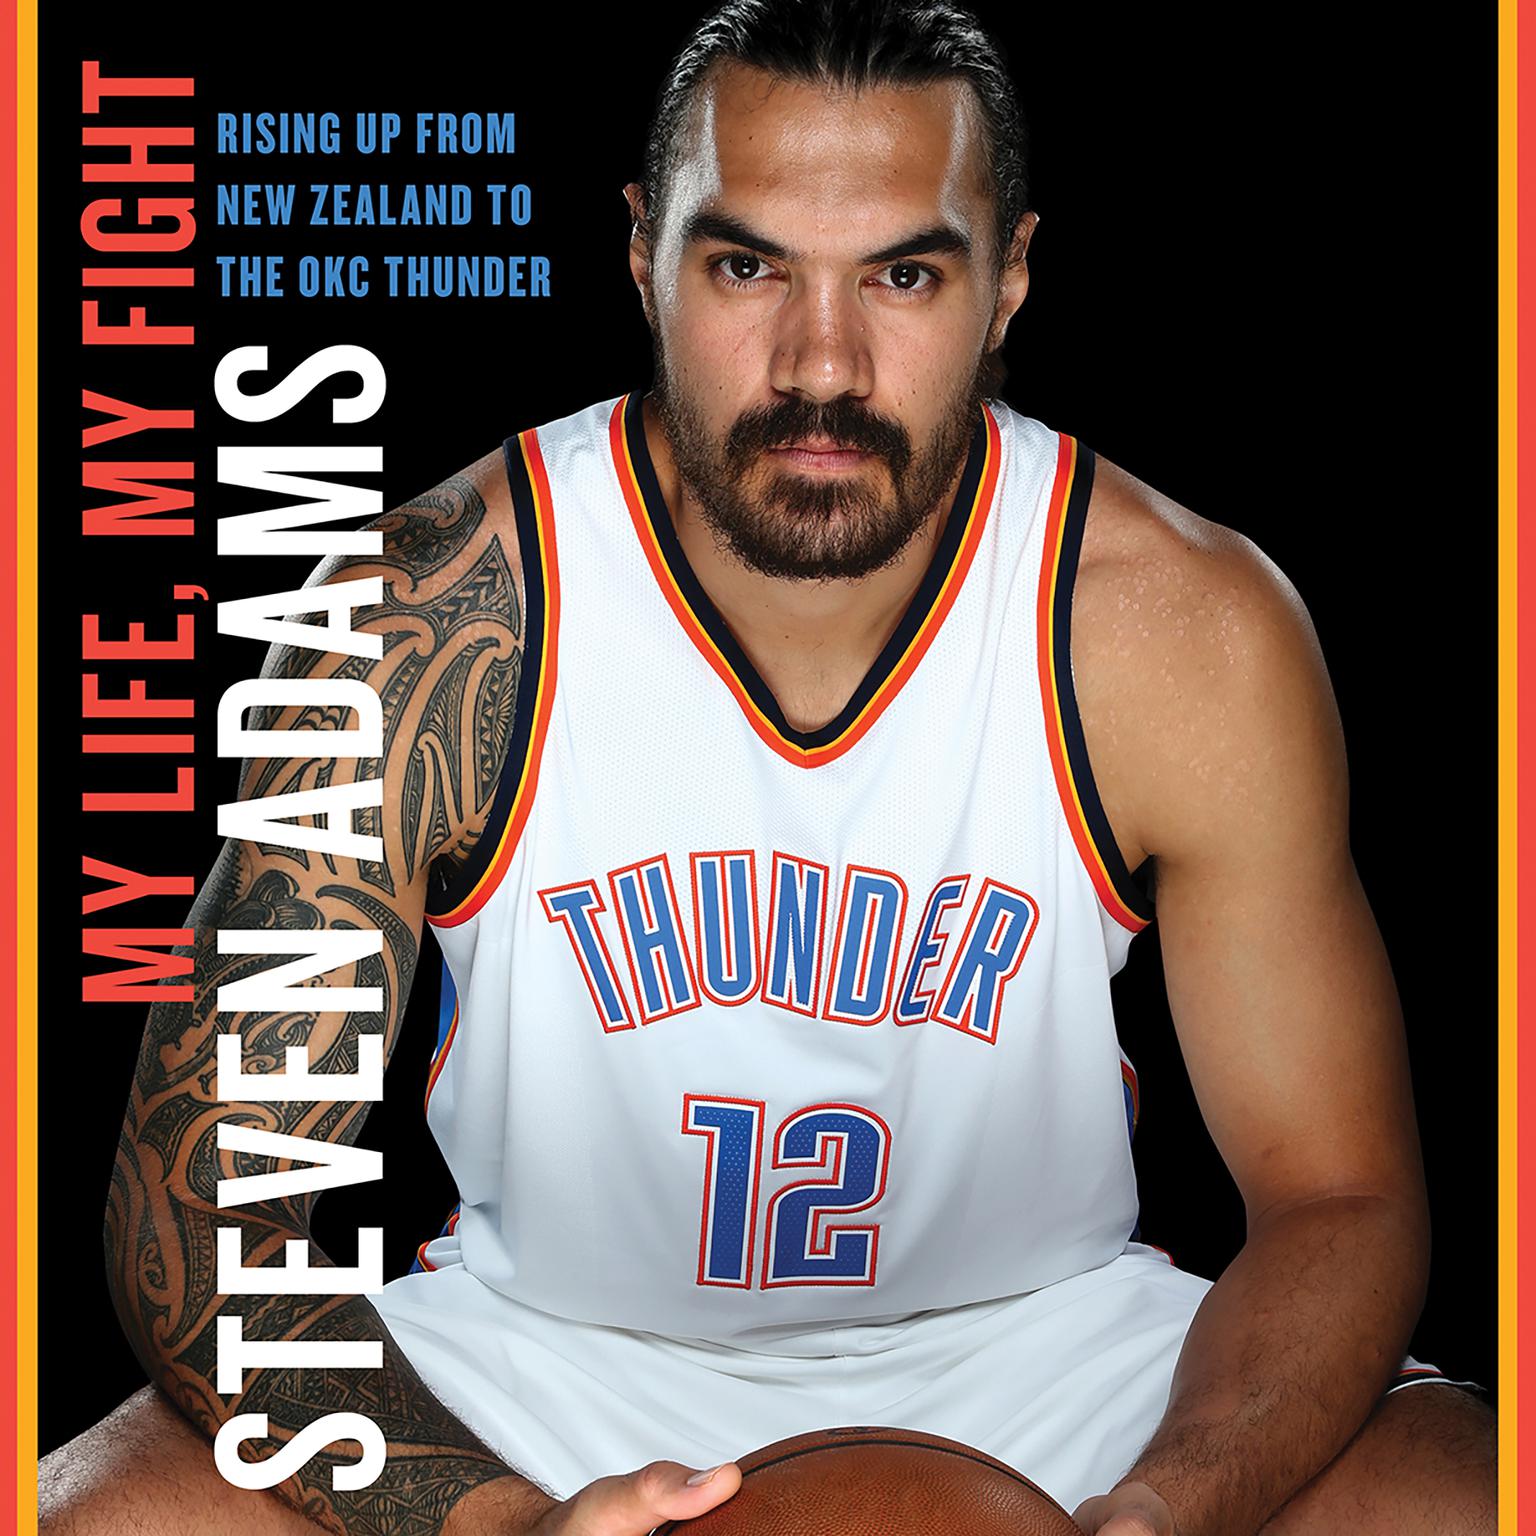 My Life, My Fight: Rising Up from New Zealand to the OKC Thunder Audiobook, by Steven Adams